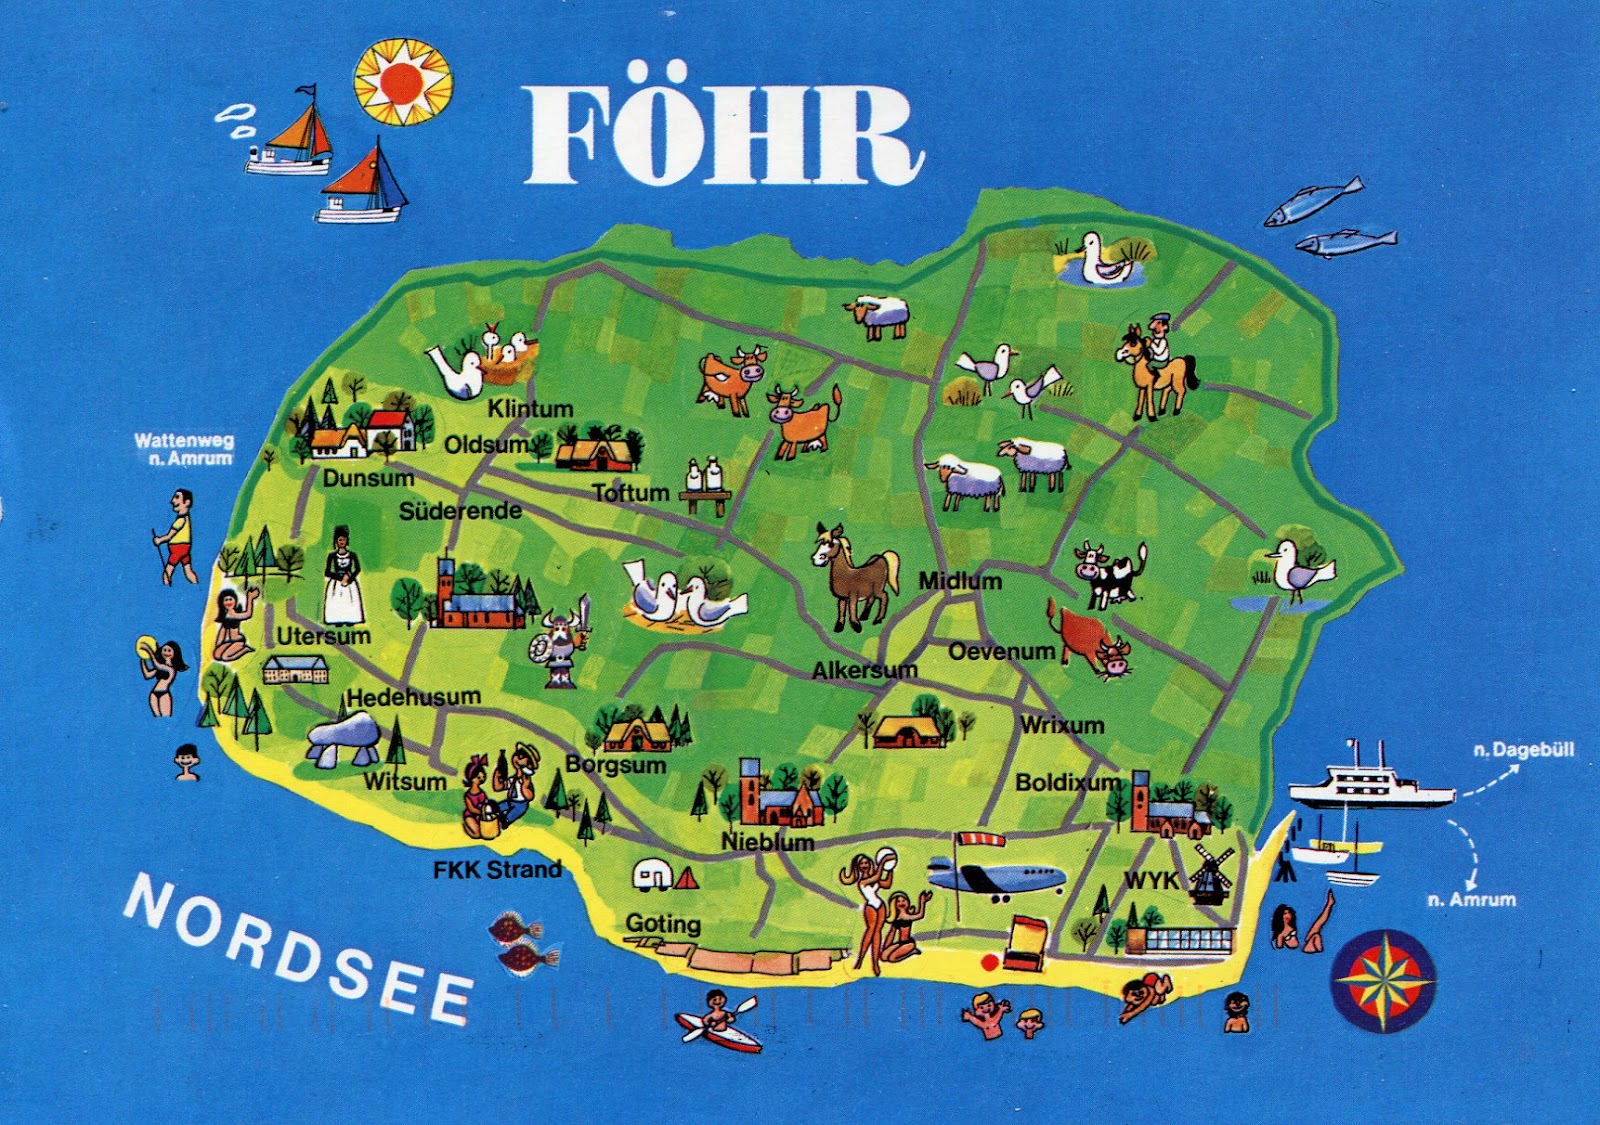 Insel Föhr illustrated | Germany, Family comes first, Travel